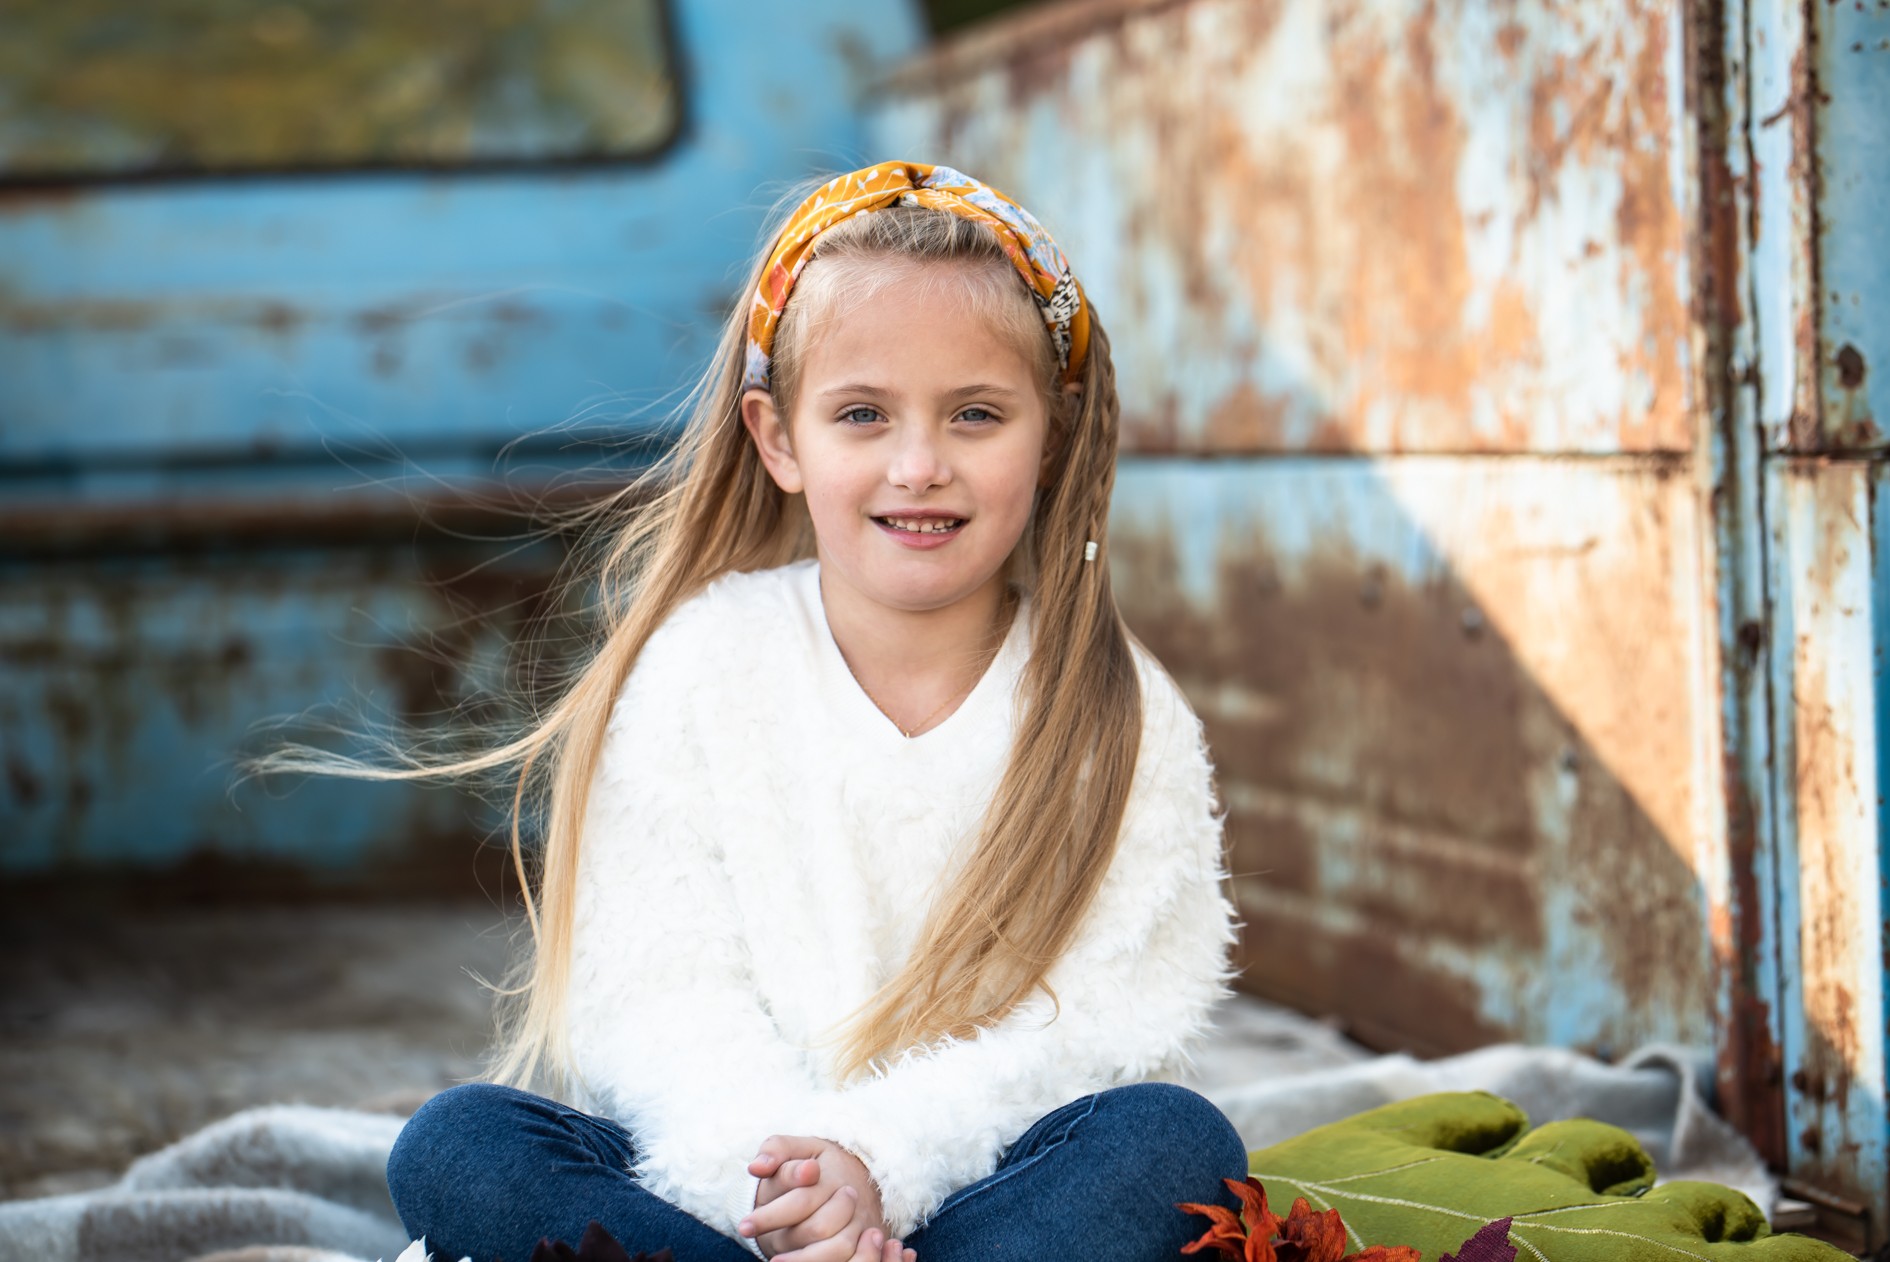 Raynah's 6 Year Photo Shoot with CeMe Photography featured on Nashville Baby Guide